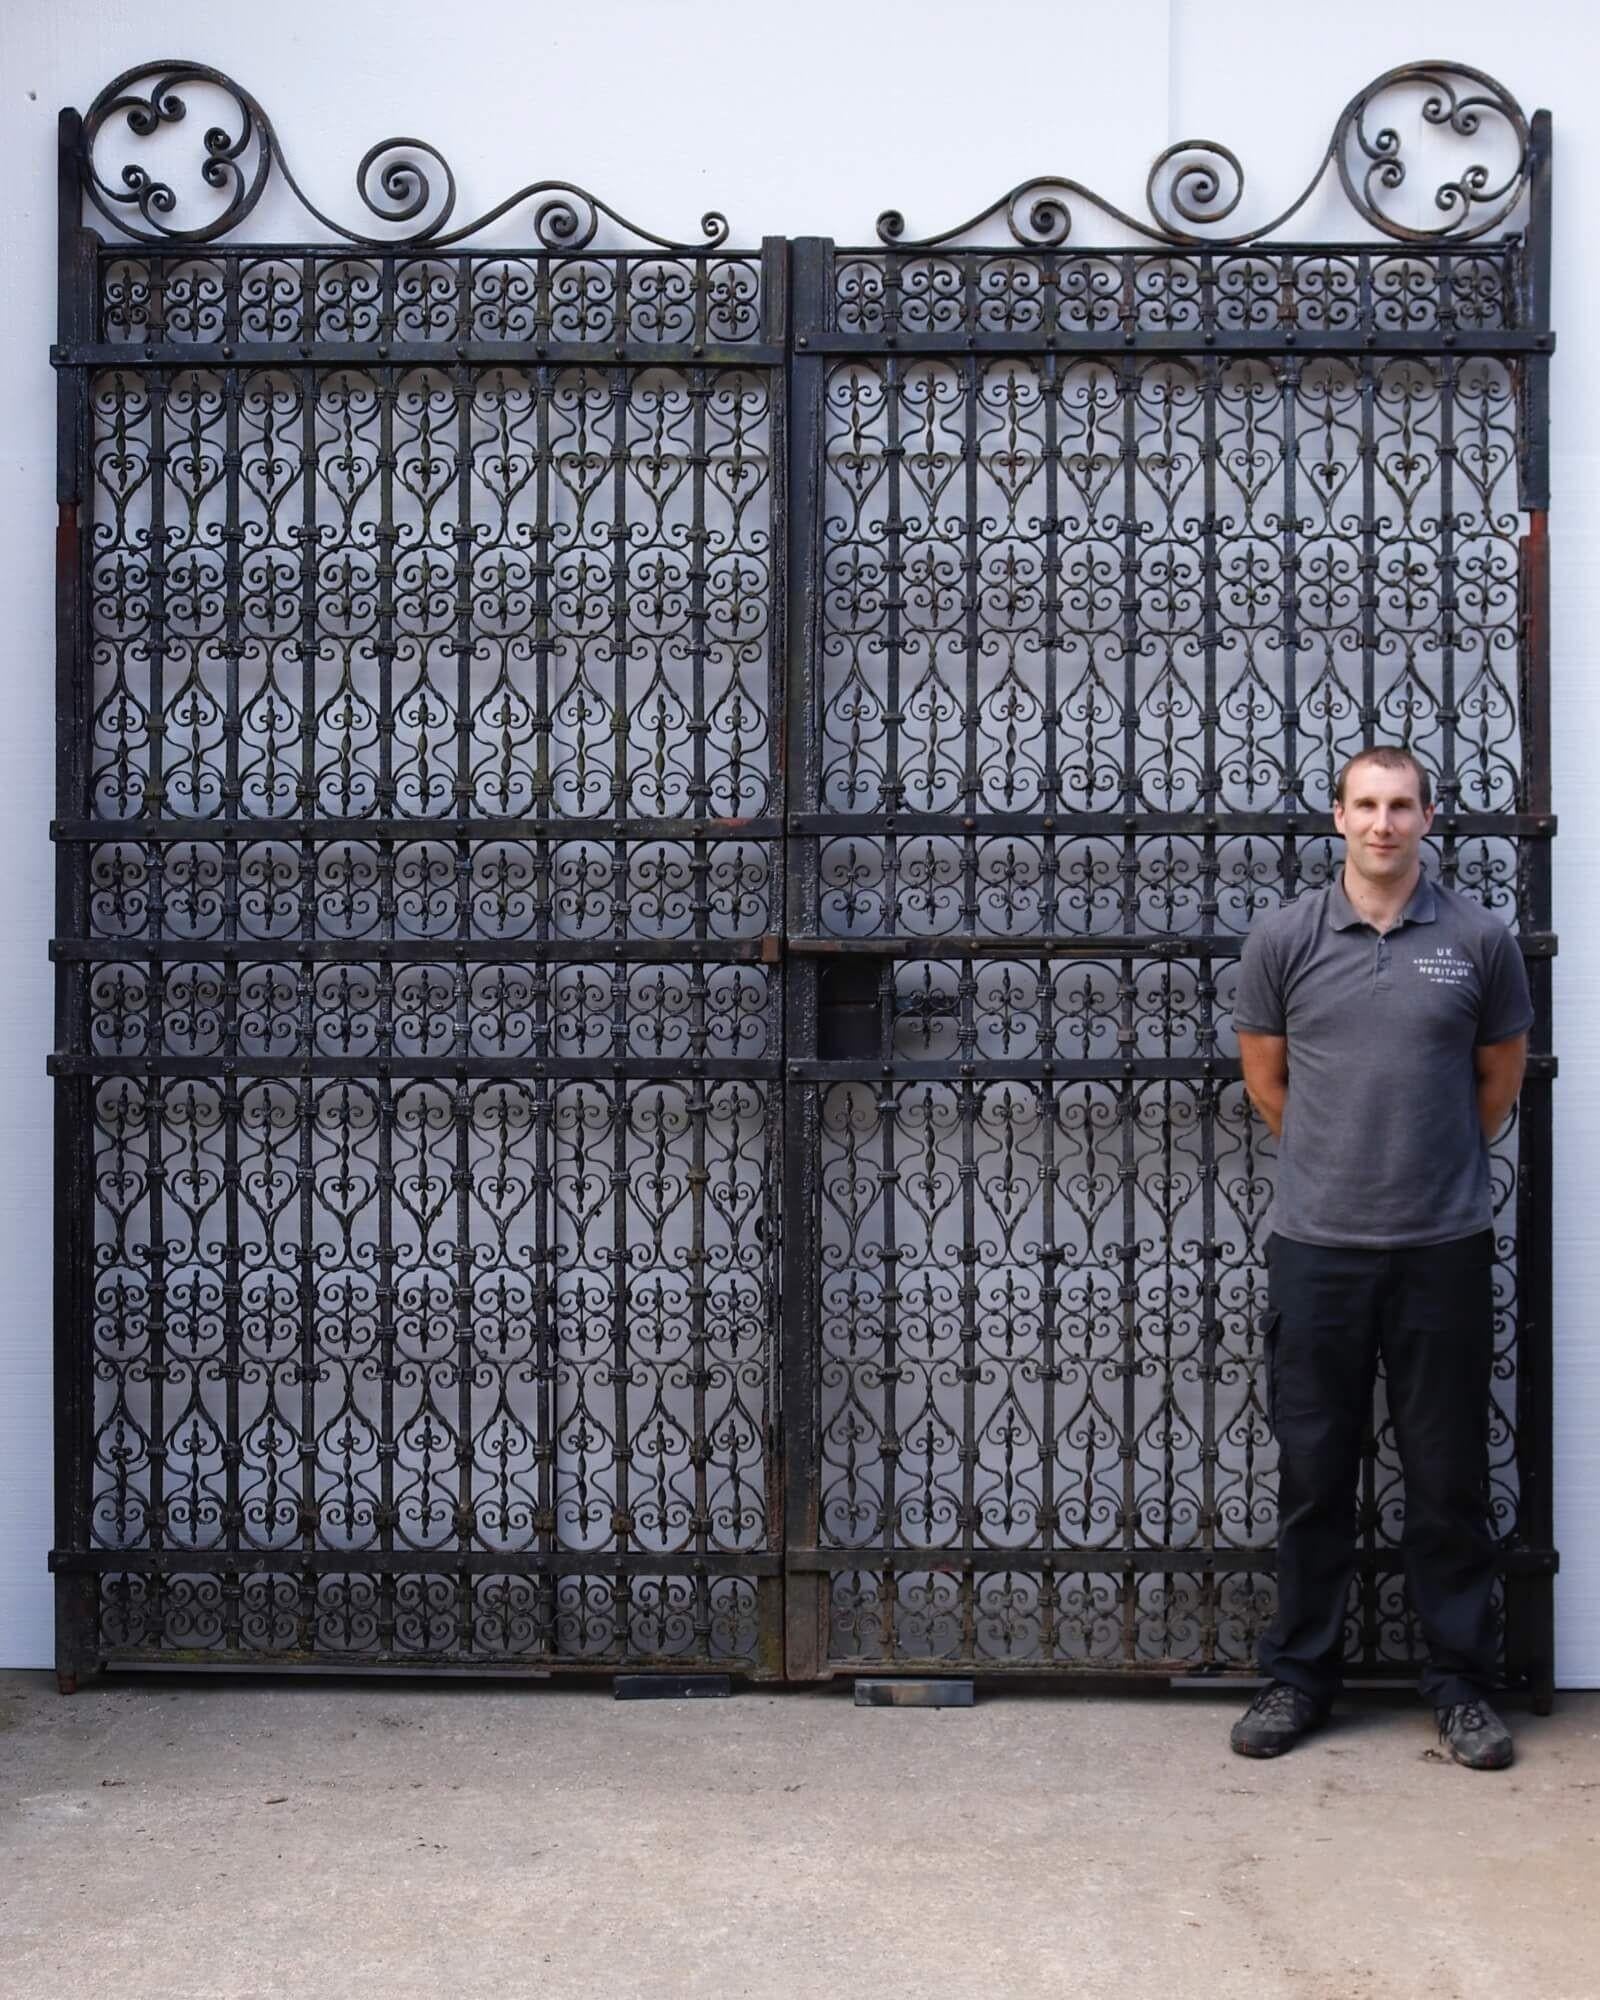 Standing at over 10ft tall, this spectacular set of ornately crafted antique Georgian style driveway gates make an impressive entrance to the grounds of an expansive country estate or large townhouse property.

Beautifully crafted, these antique